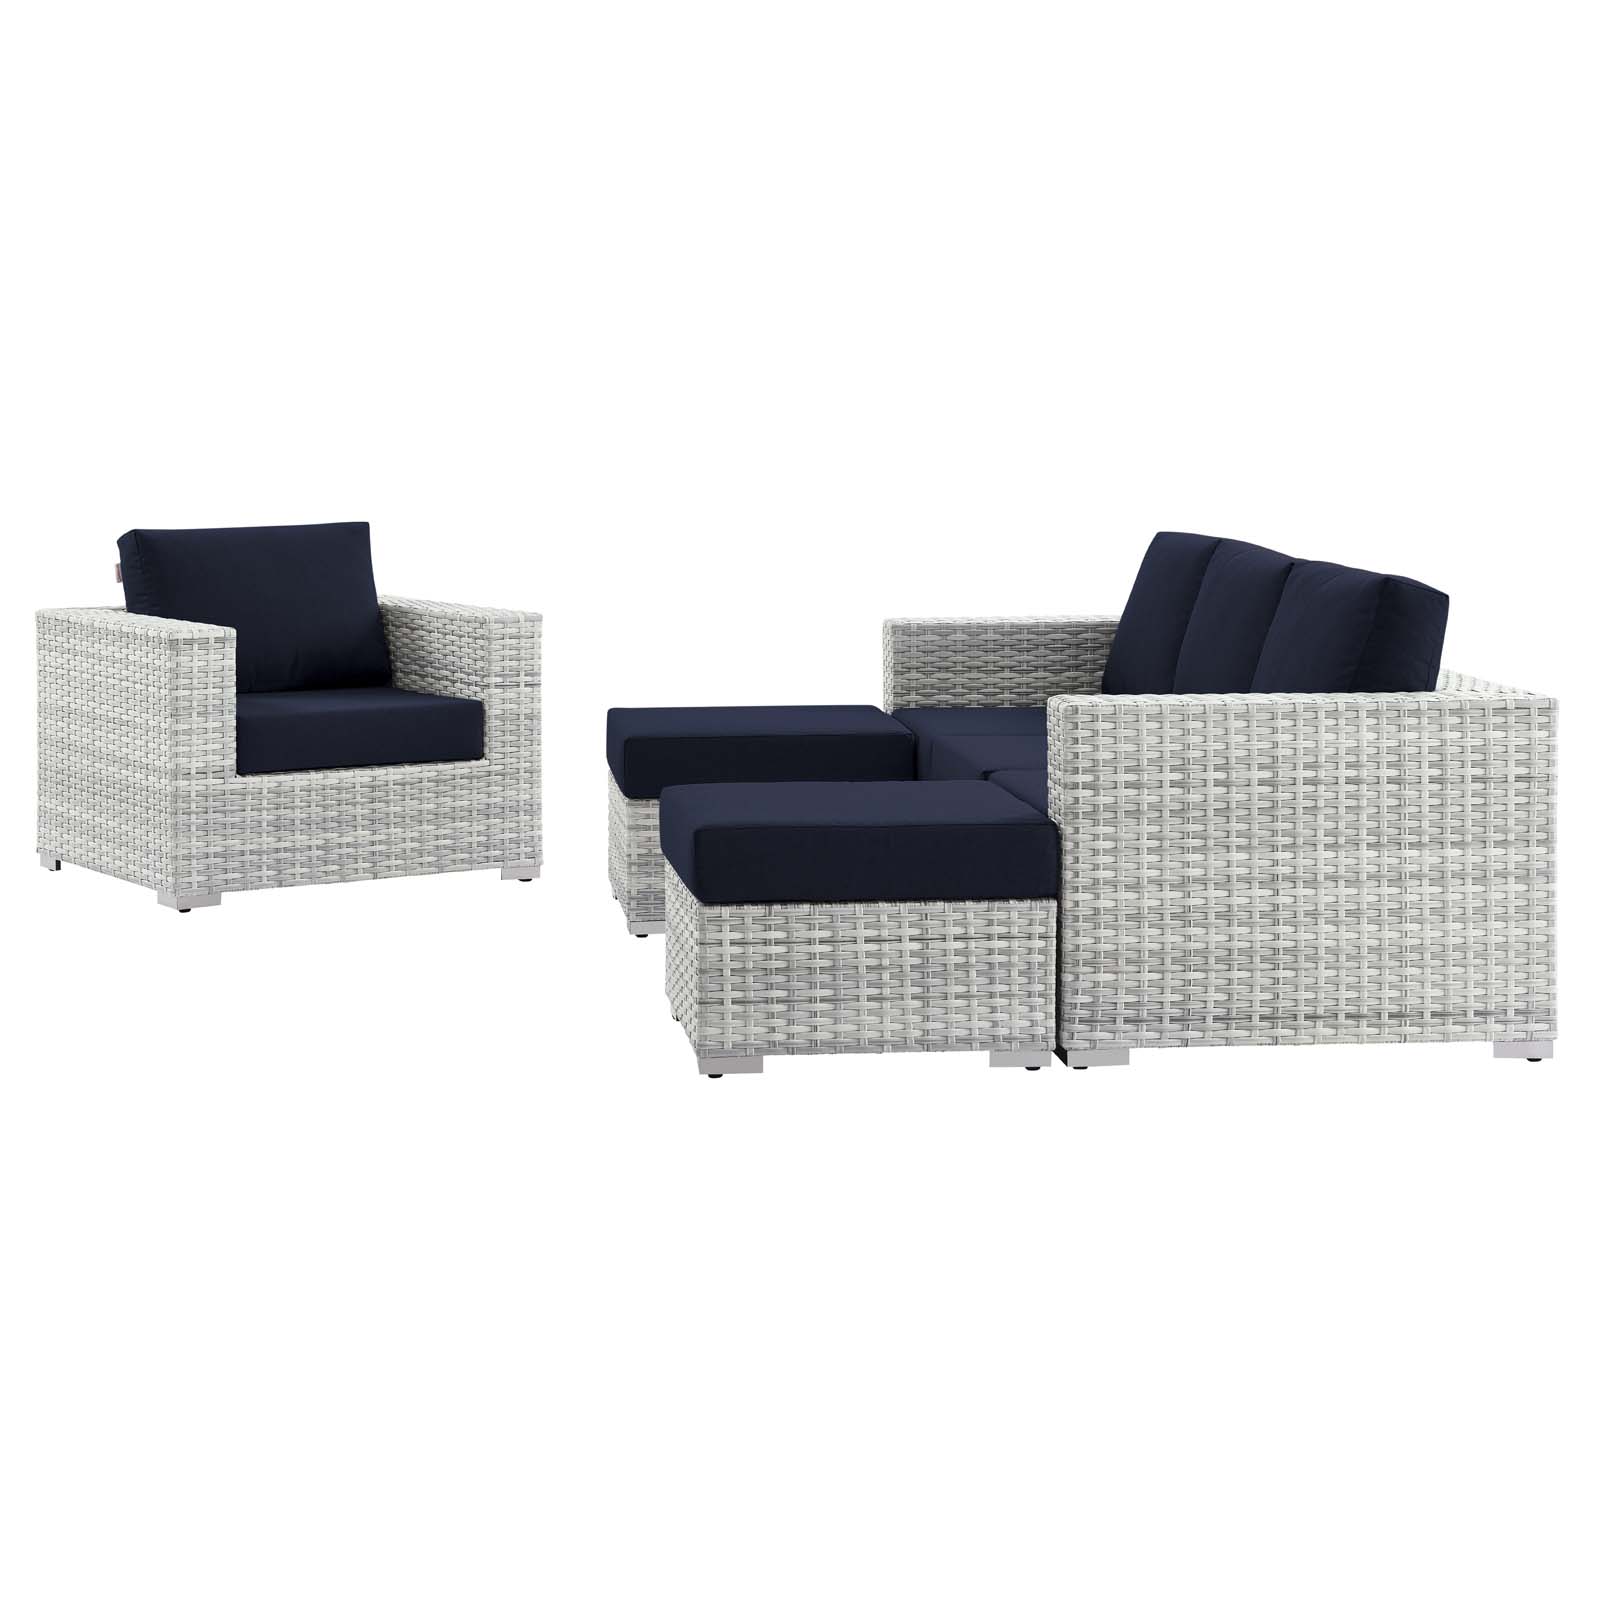 Lounge Sectional Sofa Chair Set, Rattan, Wicker, Light Grey Gray Blue Navy, Modern Contemporary Urban Design, Outdoor Patio Balcony Cafe Bistro Garden Furniture Hotel Hospitality - image 3 of 10